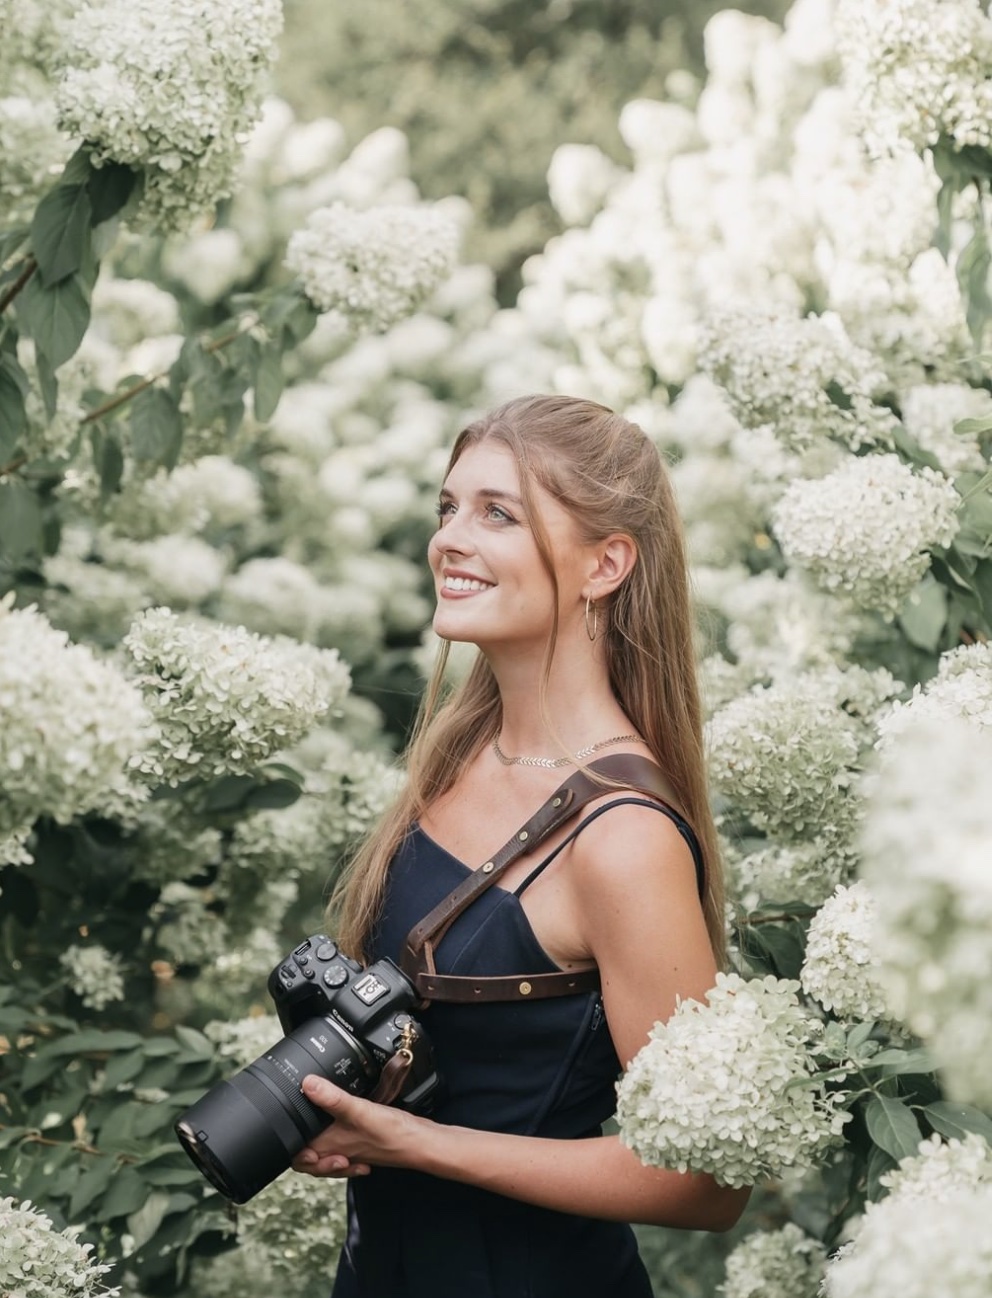 Rachel Yearick posing with her camera in the middle of white flowers at a wedding shoot